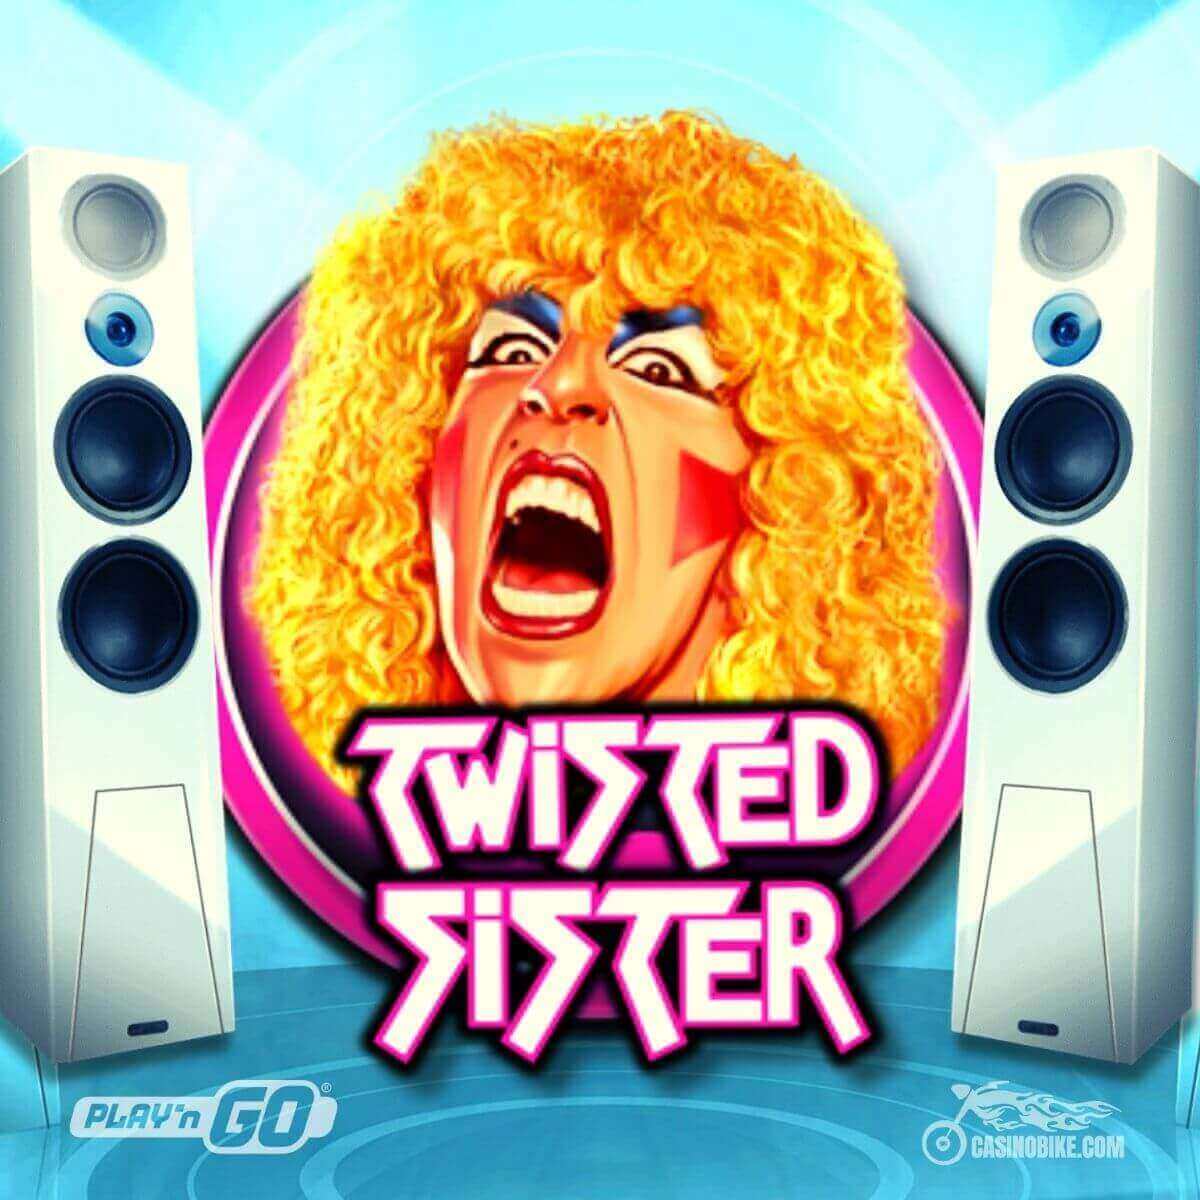 Twisted Sister Slot by Play'n Go